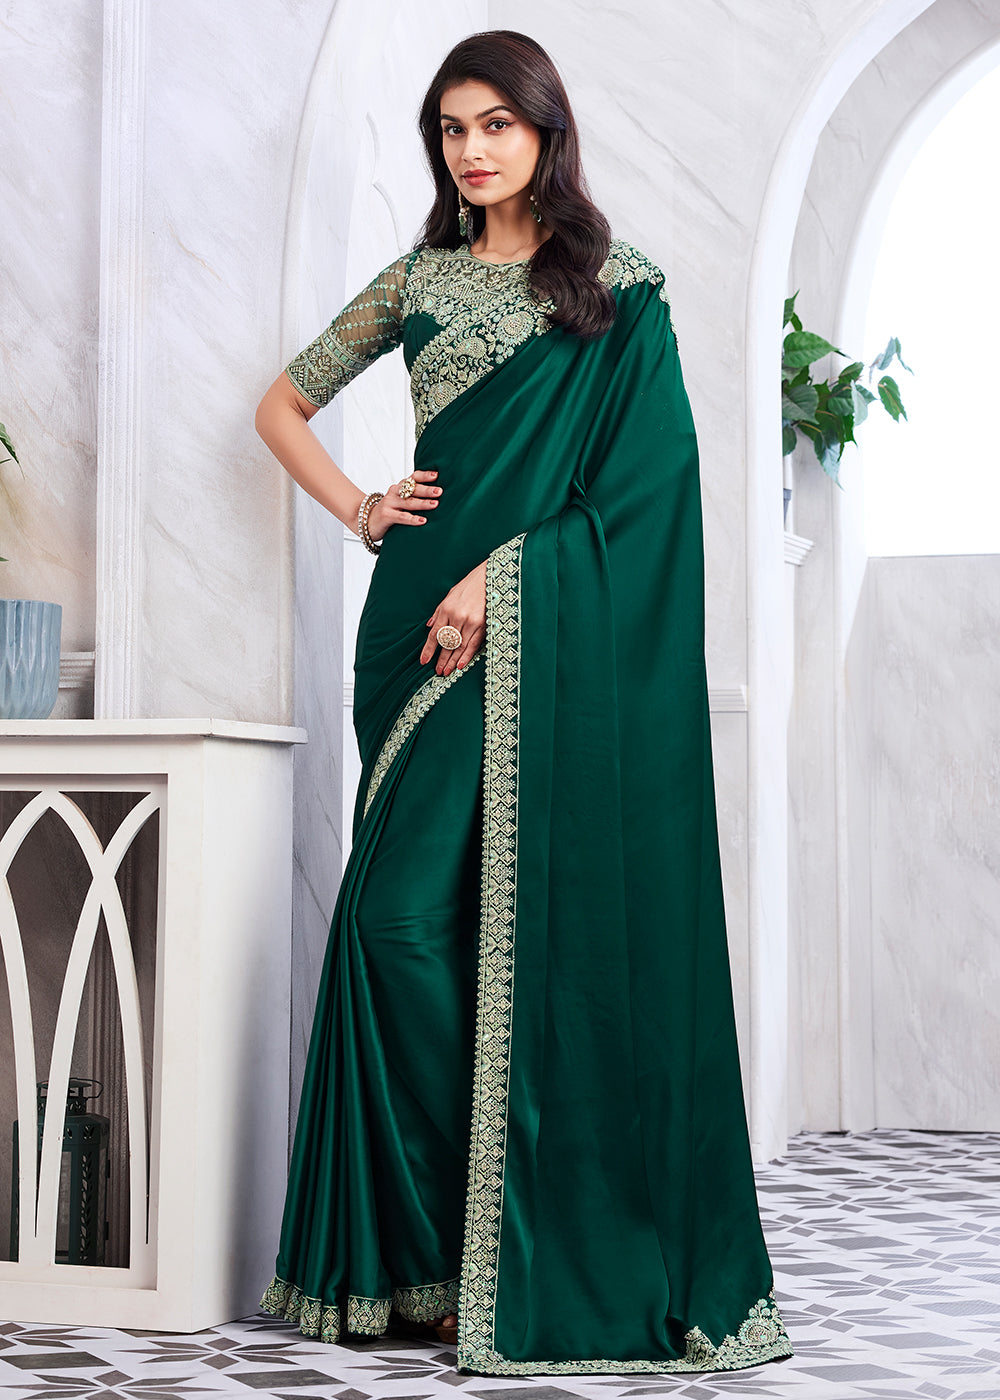 Buy Now Lovely Bottle Green Silk Embroidered Designer Saree Online in USA, UK, Canada & Worldwide at Empress Clothing.